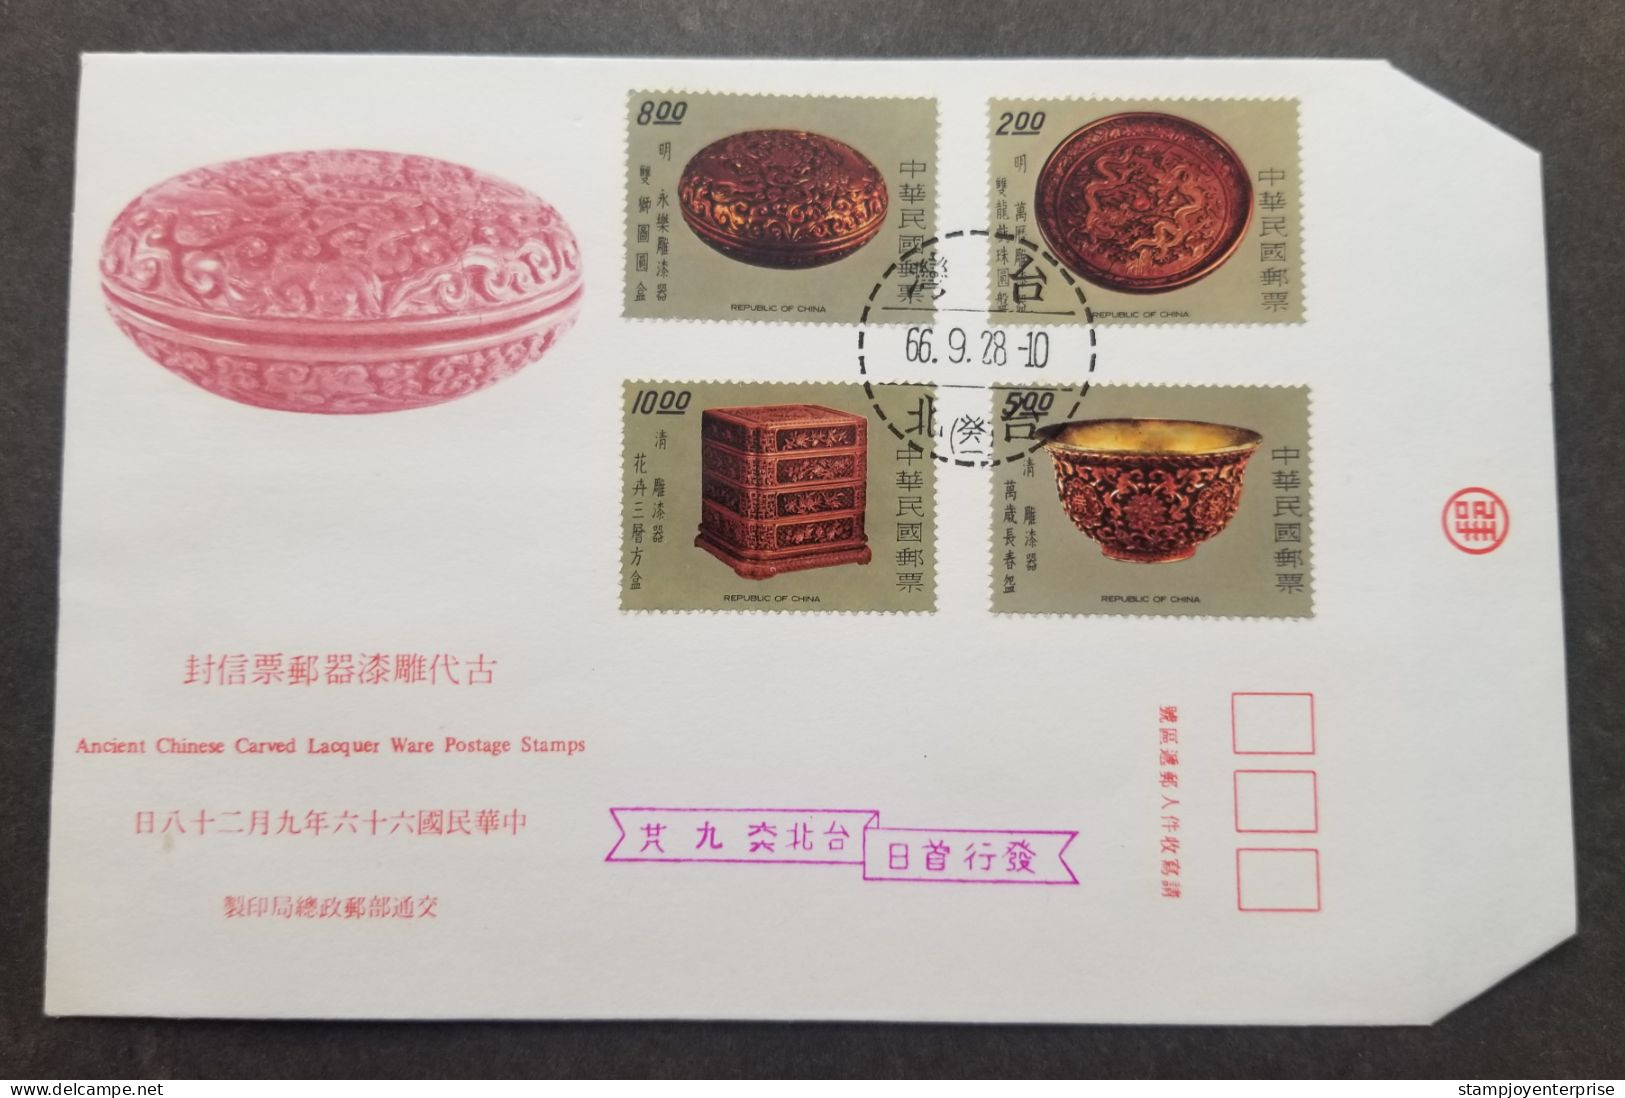 Taiwan Ancient Chinese Carved Lacquer Ware 1977 Craft Dragon (stamp FDC) - Covers & Documents